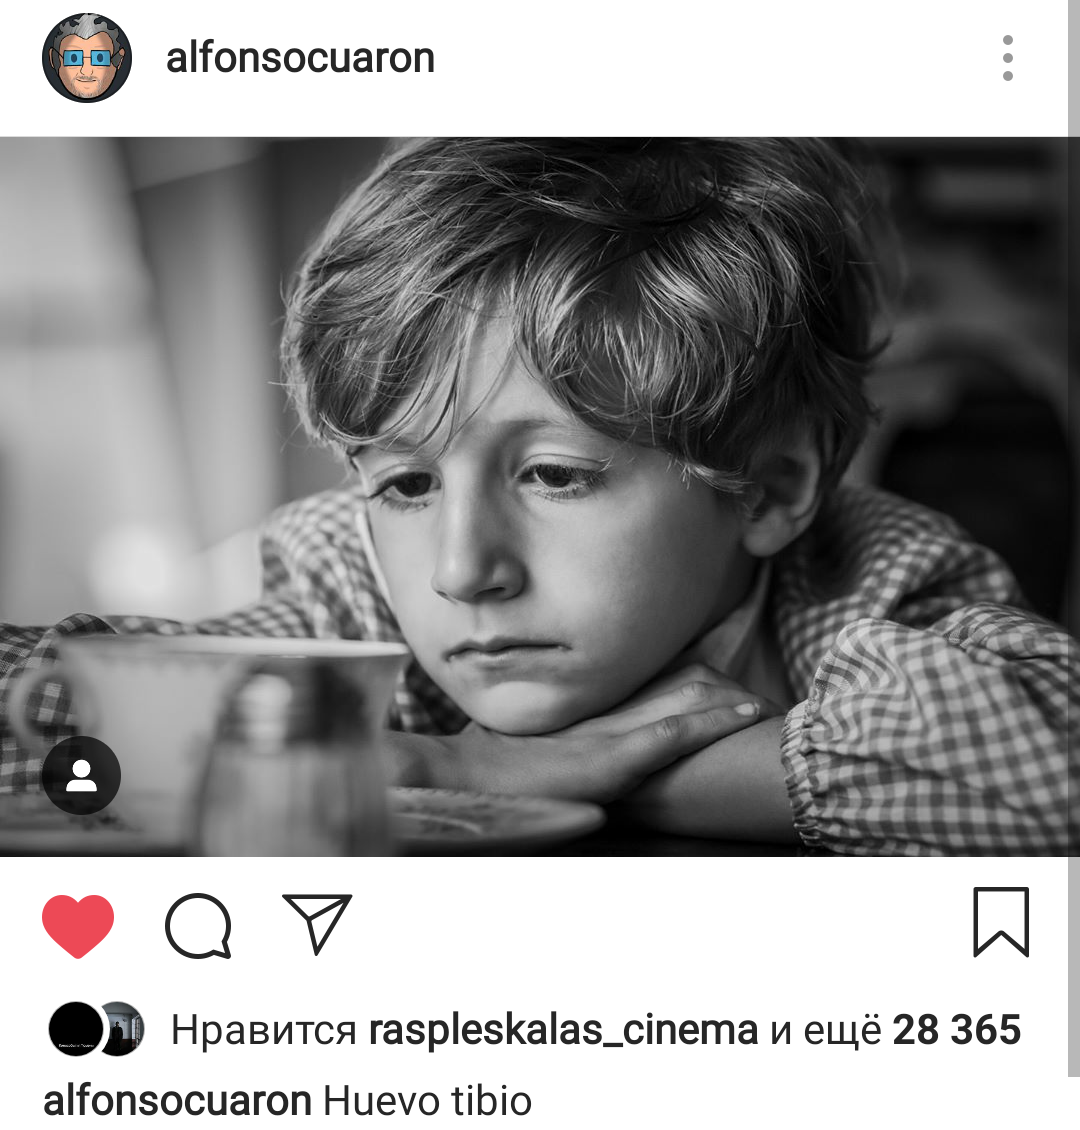 It seems that Alfonso Cuaron tried to write something in Russian - My, Alfonso CuarГіn, Lost in translation